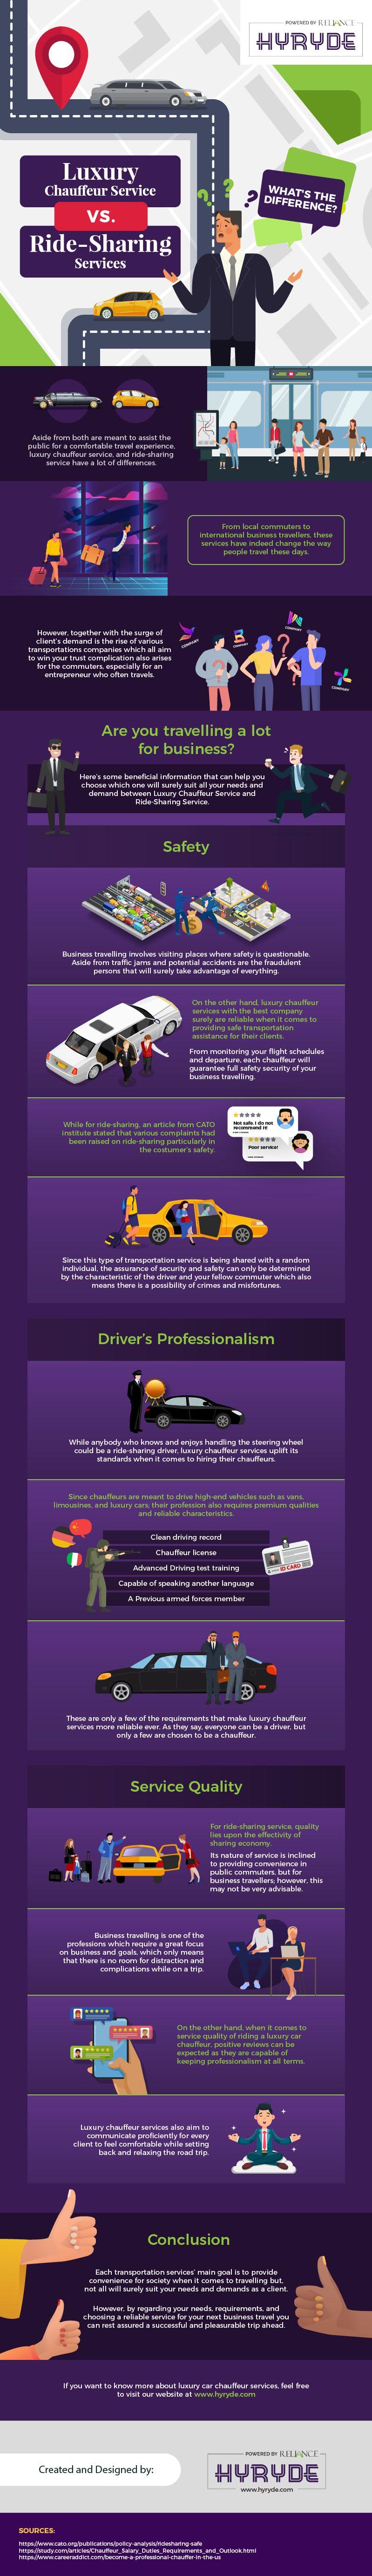 Luxury Chauffeur Service Vs. Ride-Sharing Services – What’s the Difference? #infographic